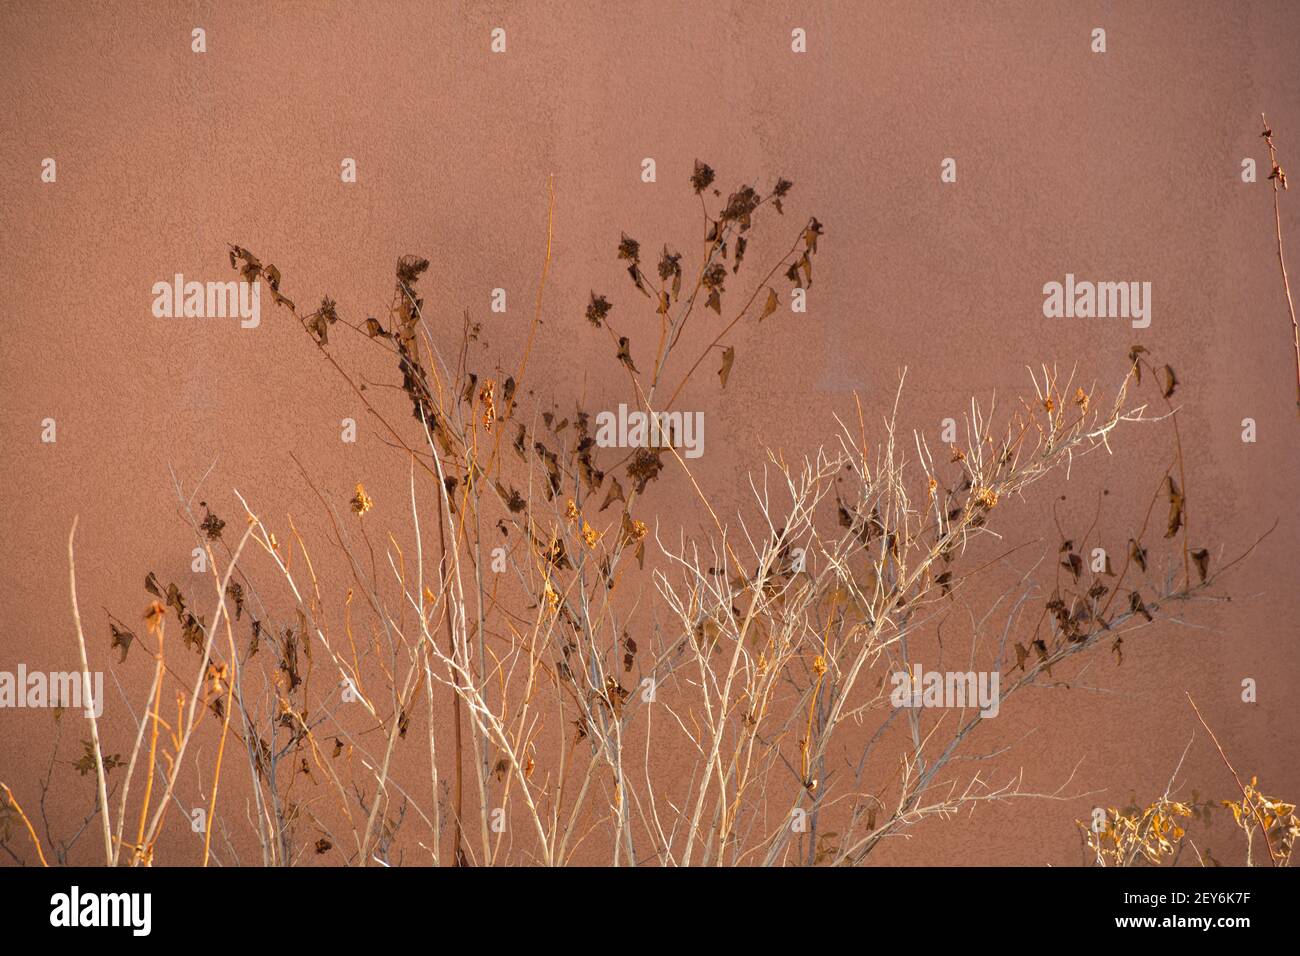 garden plant in winter dried branches and flowers against painted concrete wall of home exterior in background horizontal format empty space  for type Stock Photo